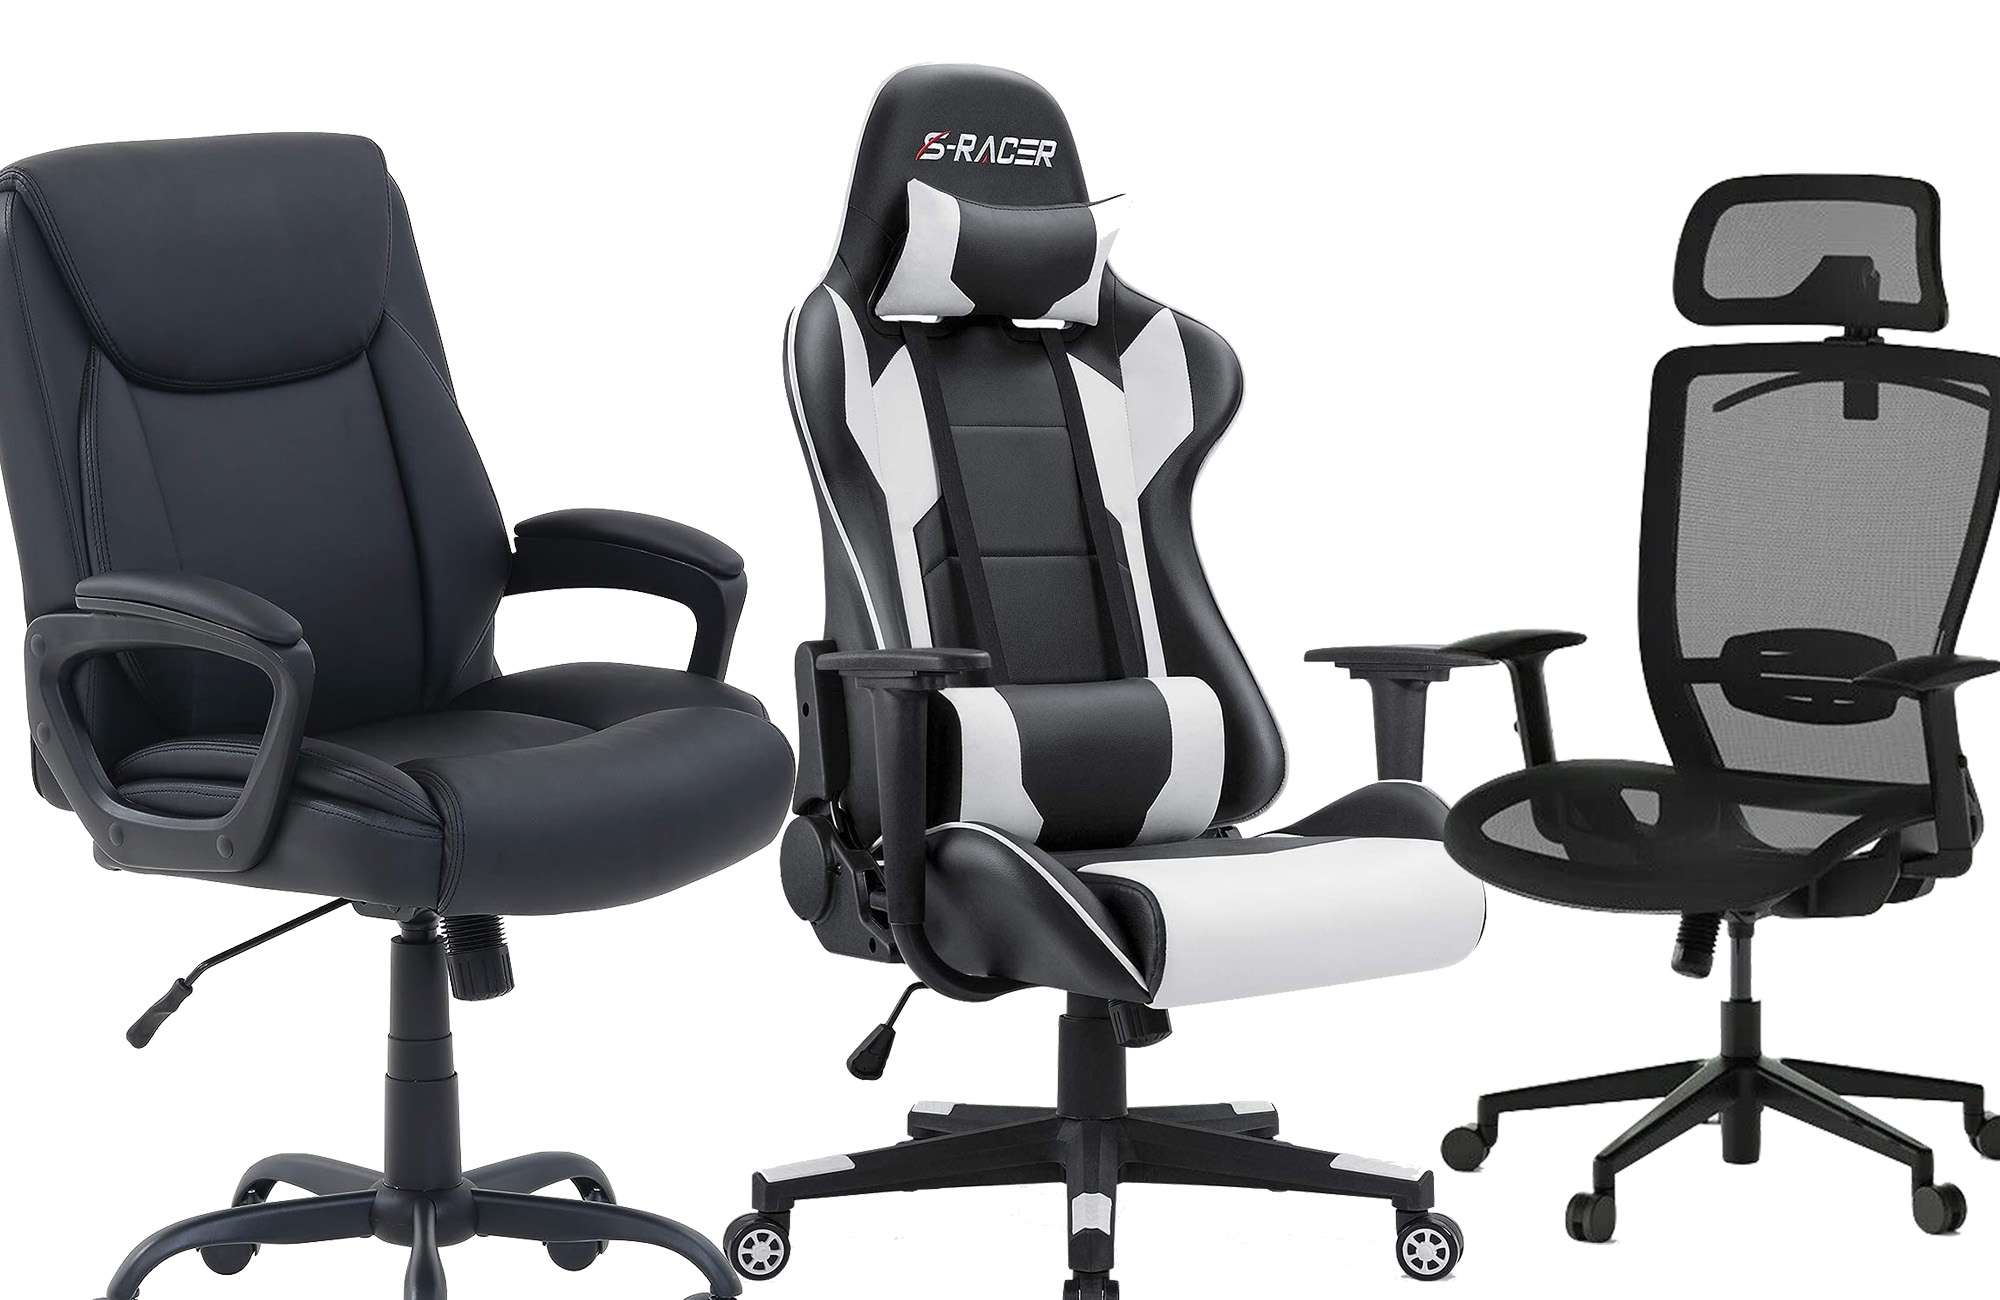 The best cheap desk chairs to support your back | Popular Science